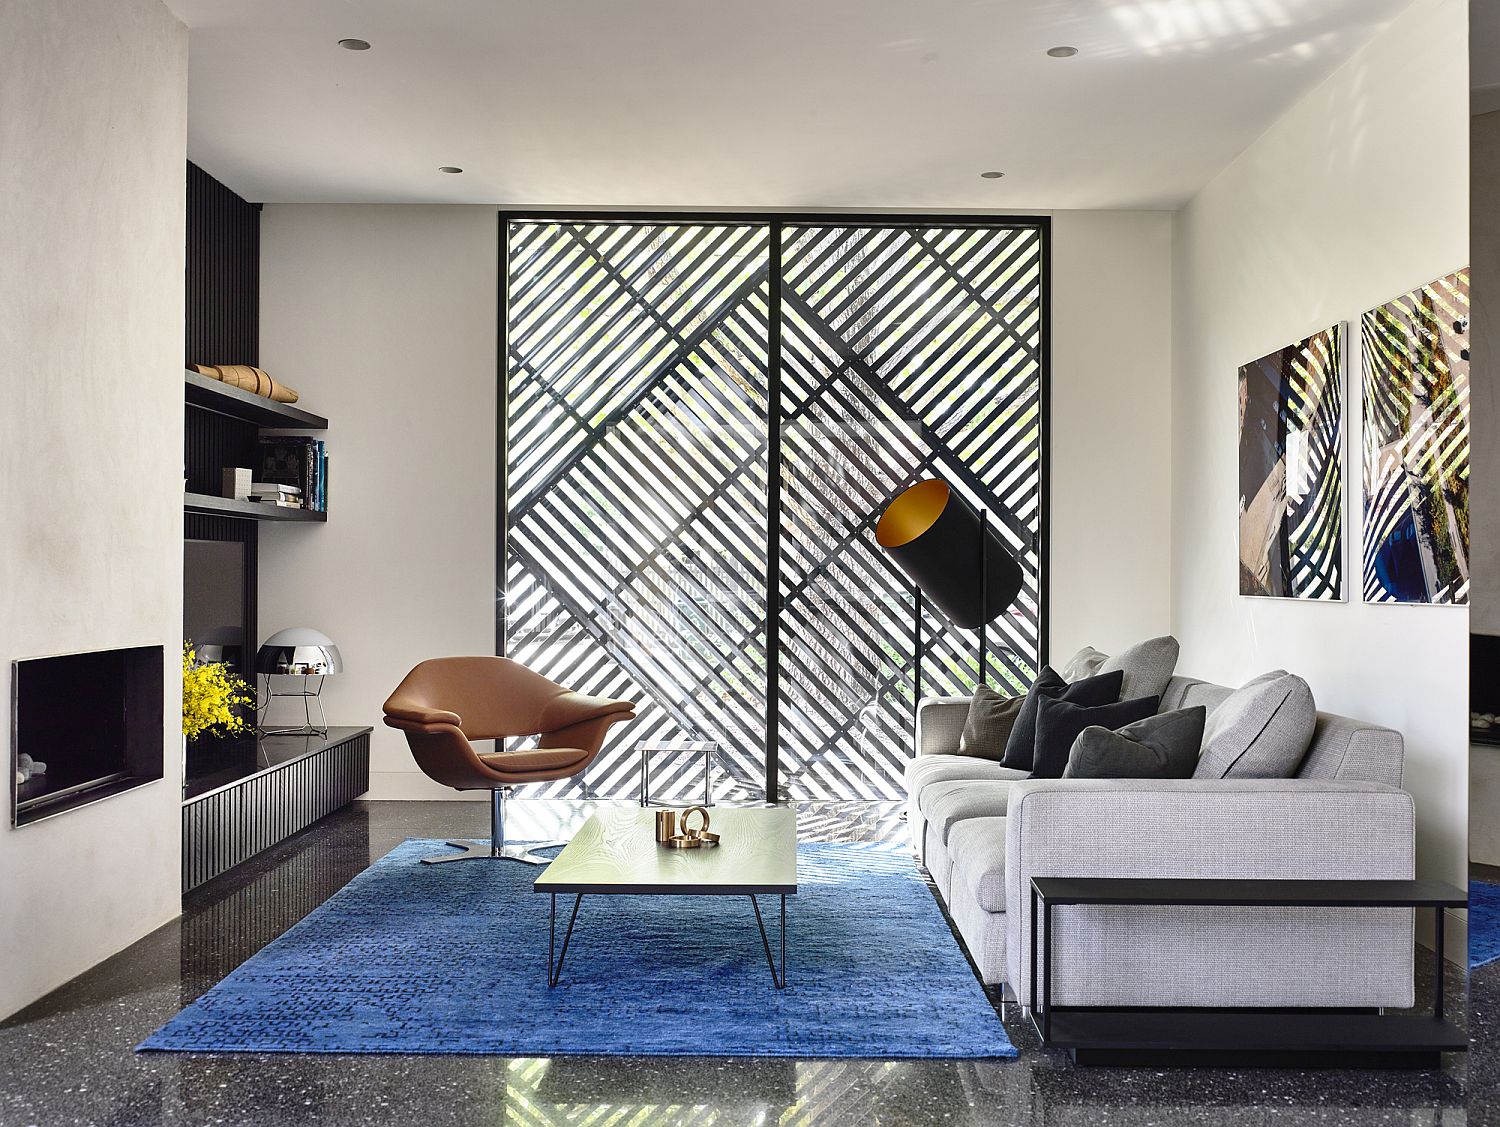 Small-and-stylish-living-area-in-white-and-black-with-rug-adding-a-dash-of-blue